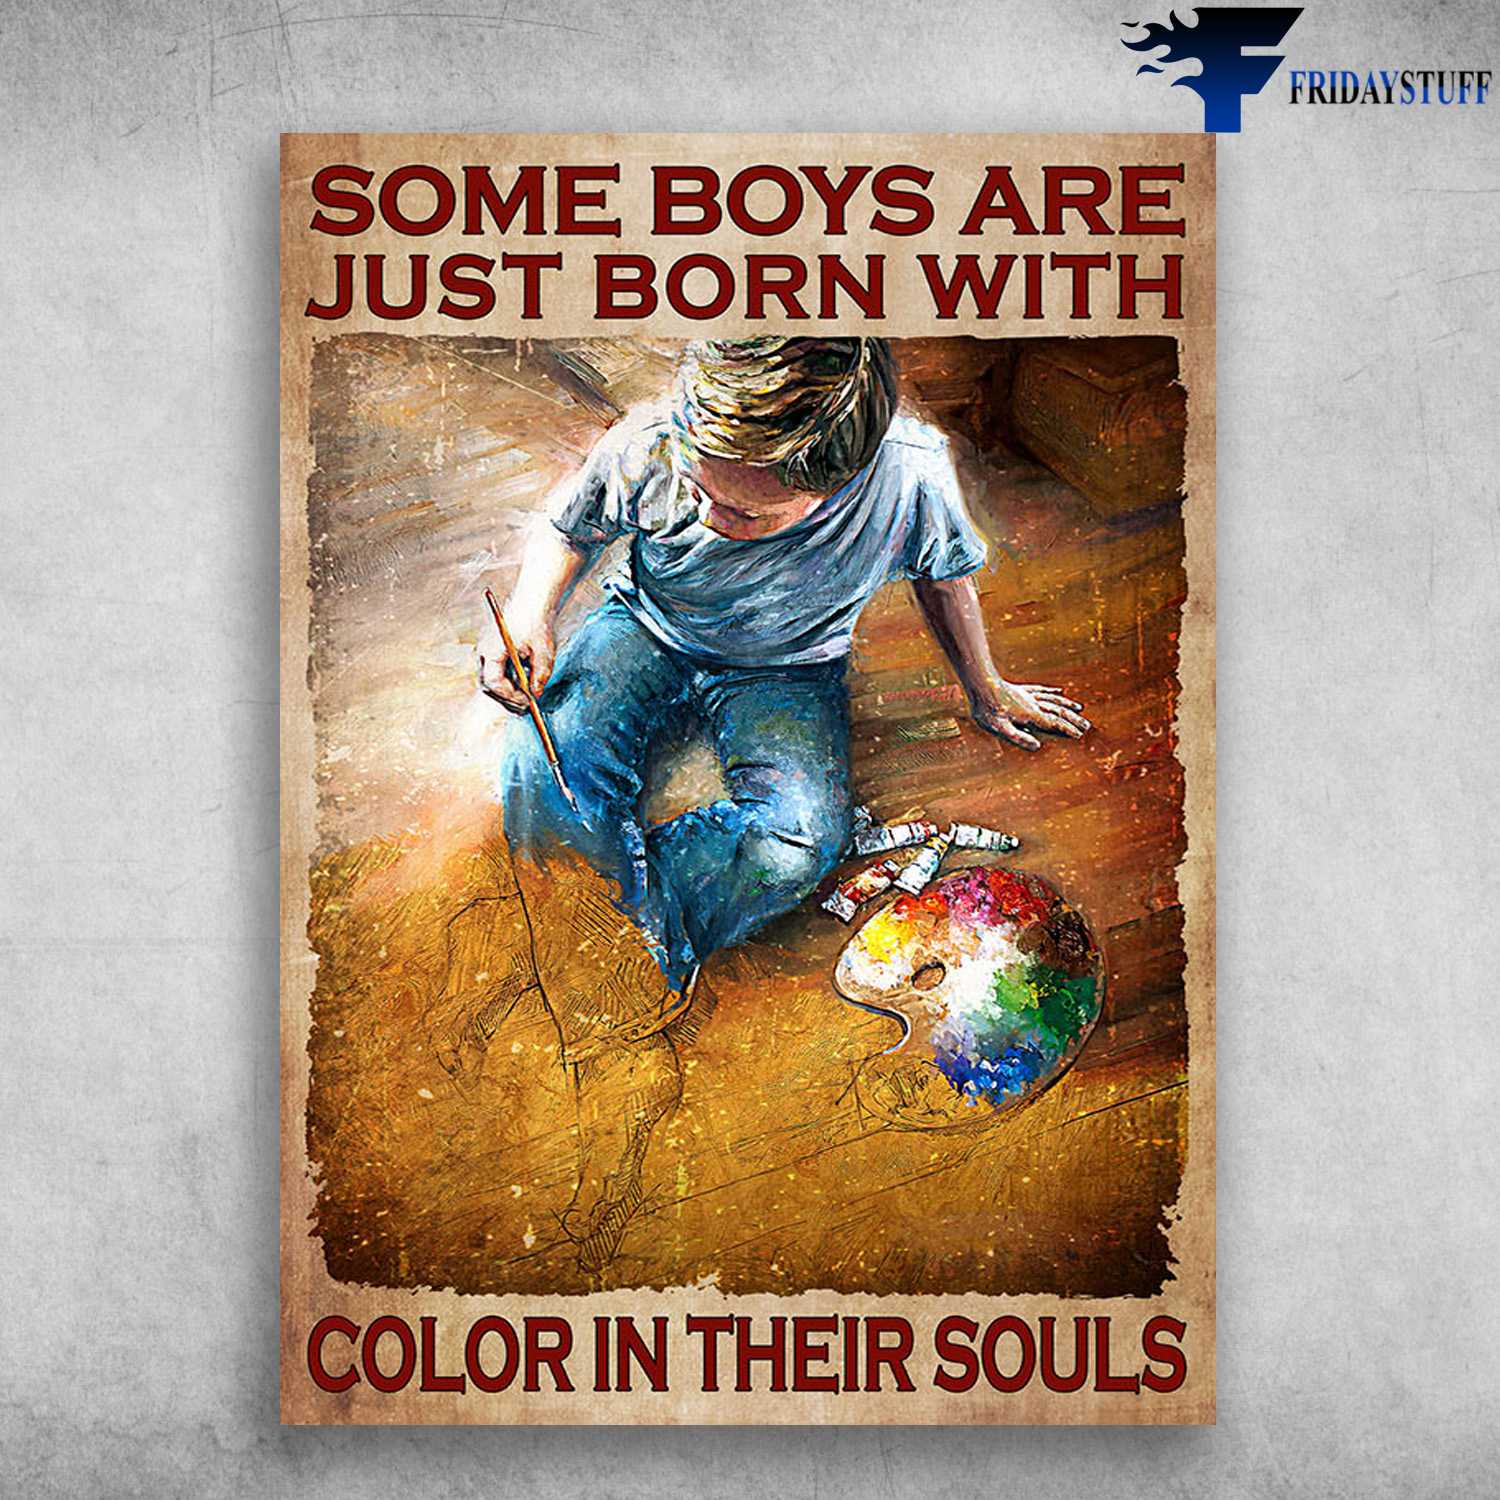 Drawing Boy - Some Boys Are Just Born With, Color In Their Souls, Painting Art